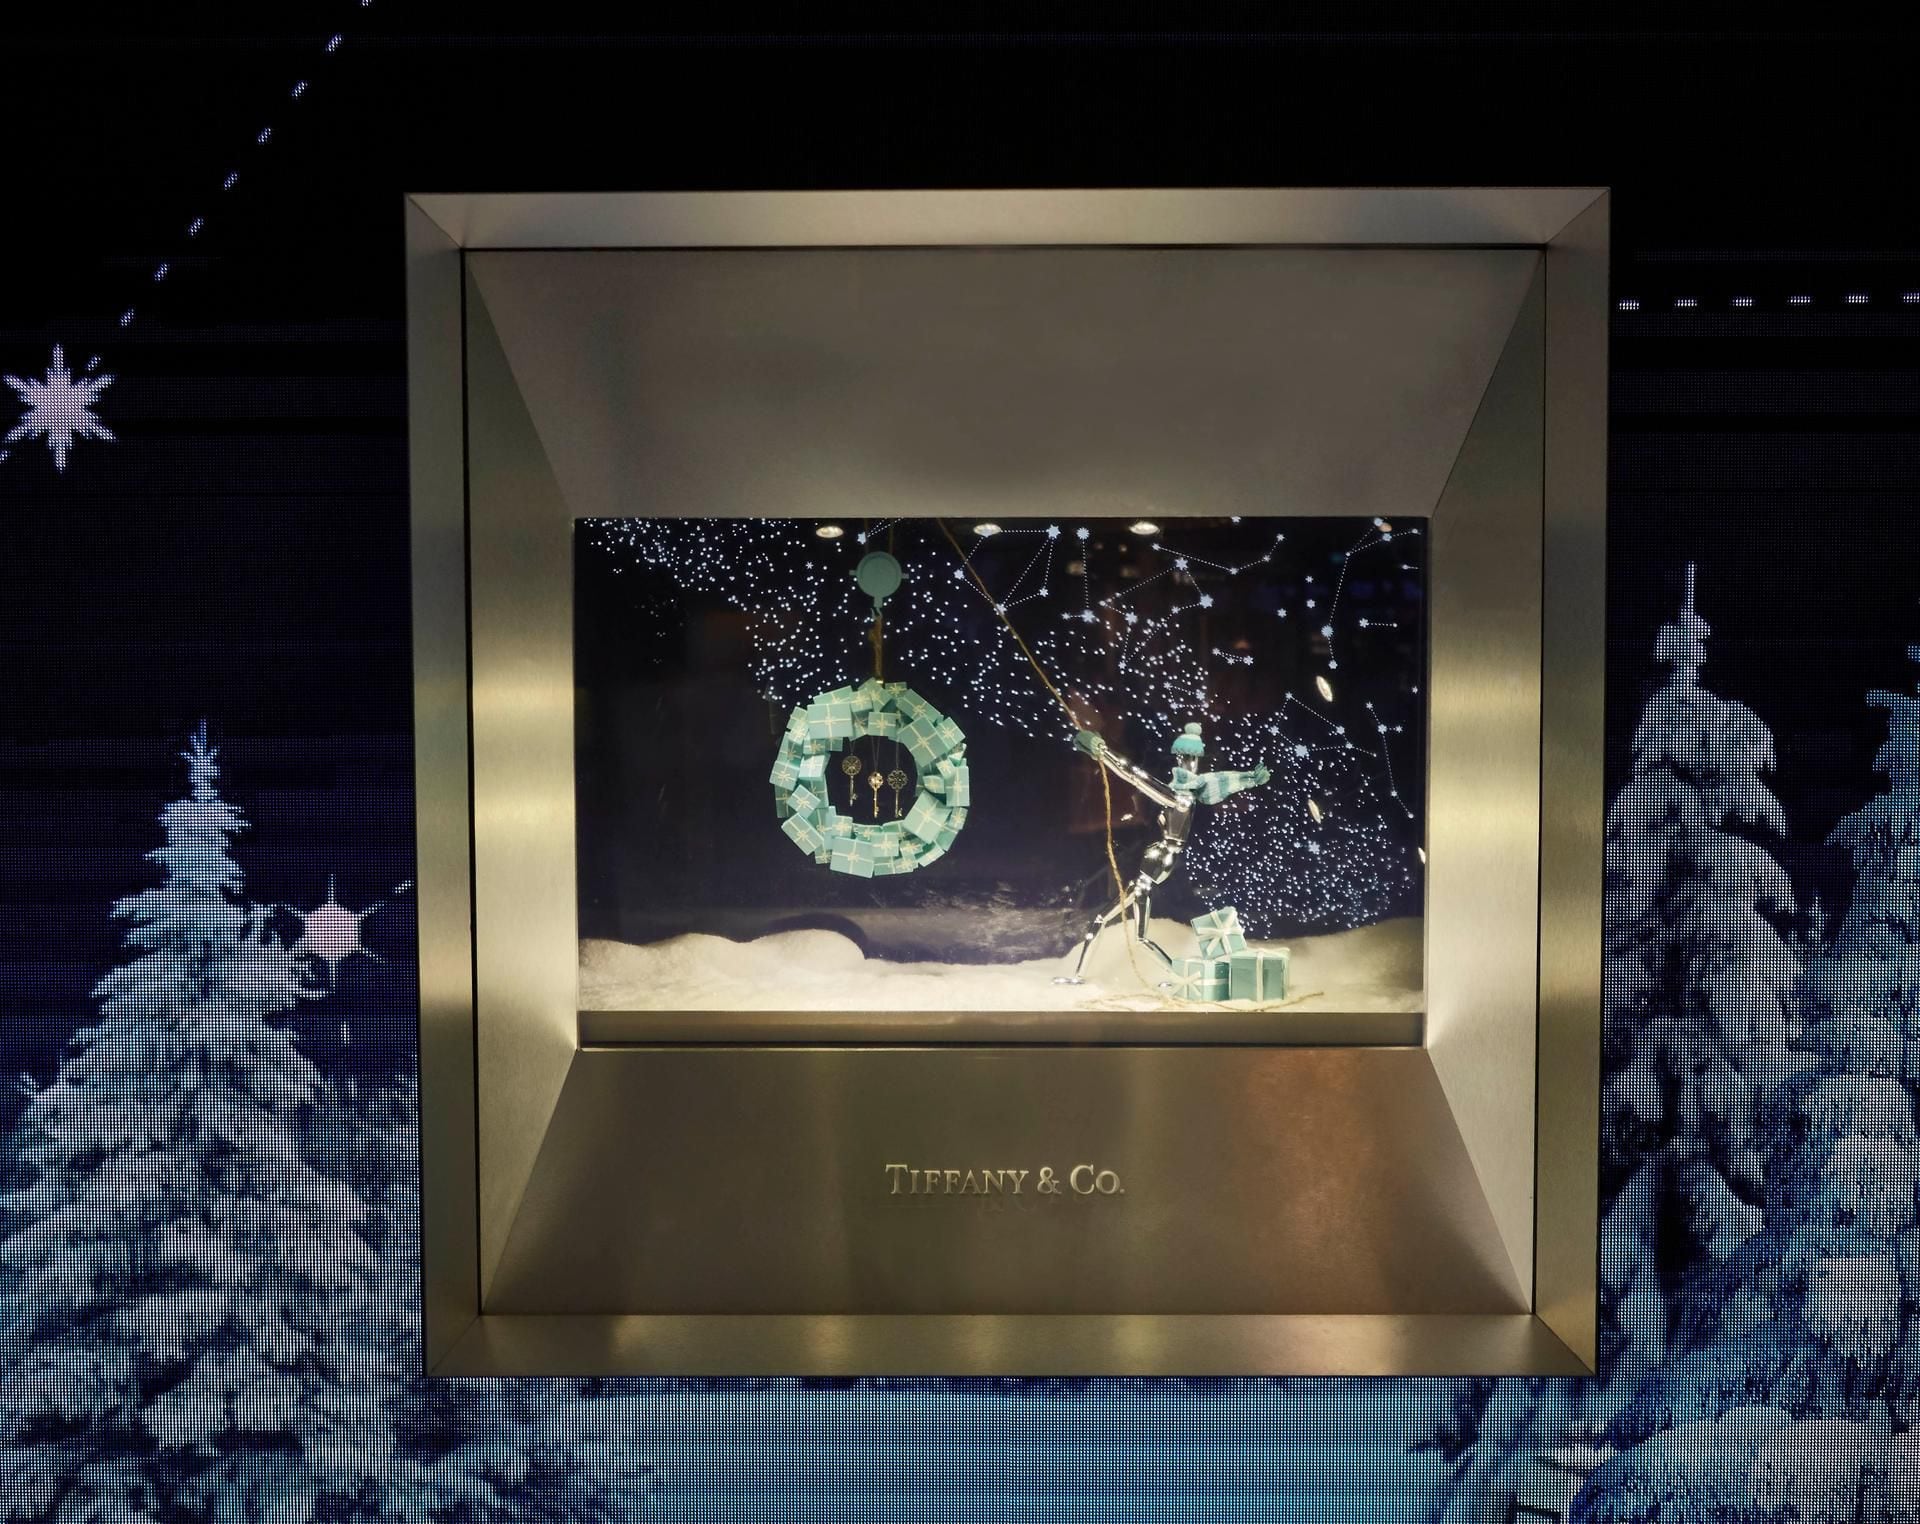 Louis Vuitton Christmas Showcase, Mannequins on the Background of